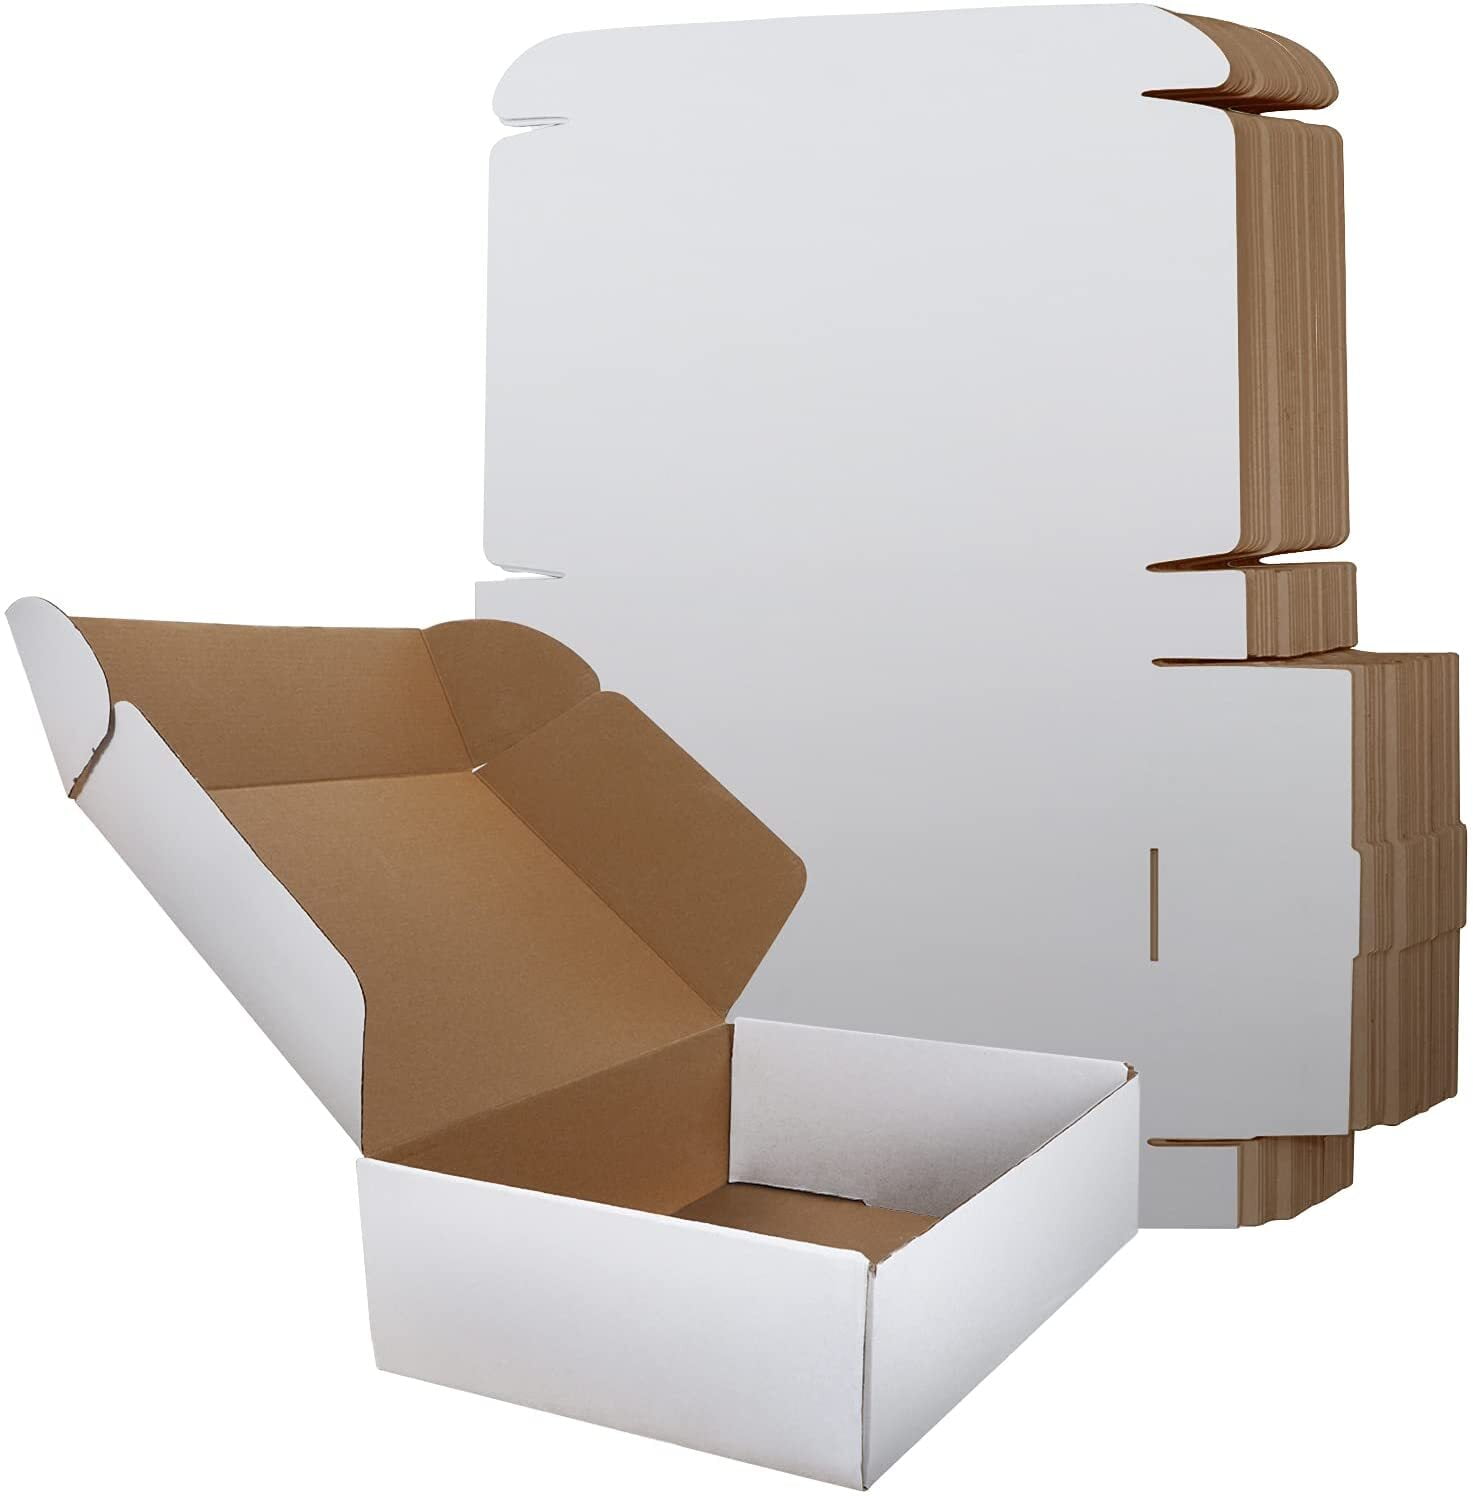 10x4x4 shipping moving packing boxes 25 ct 